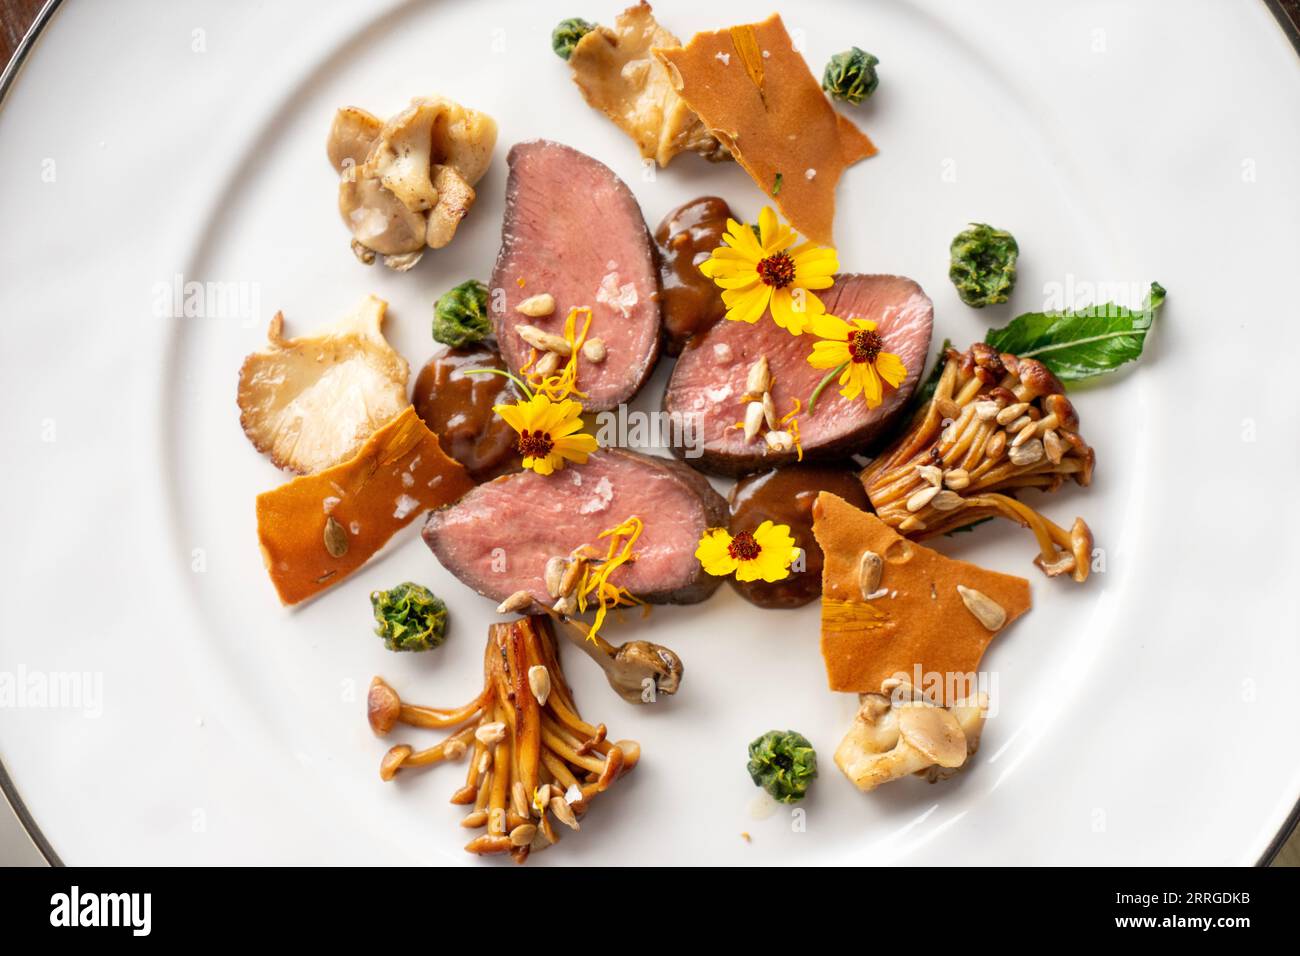 Plated dish of wild game and foraged mushrooms Stock Photo